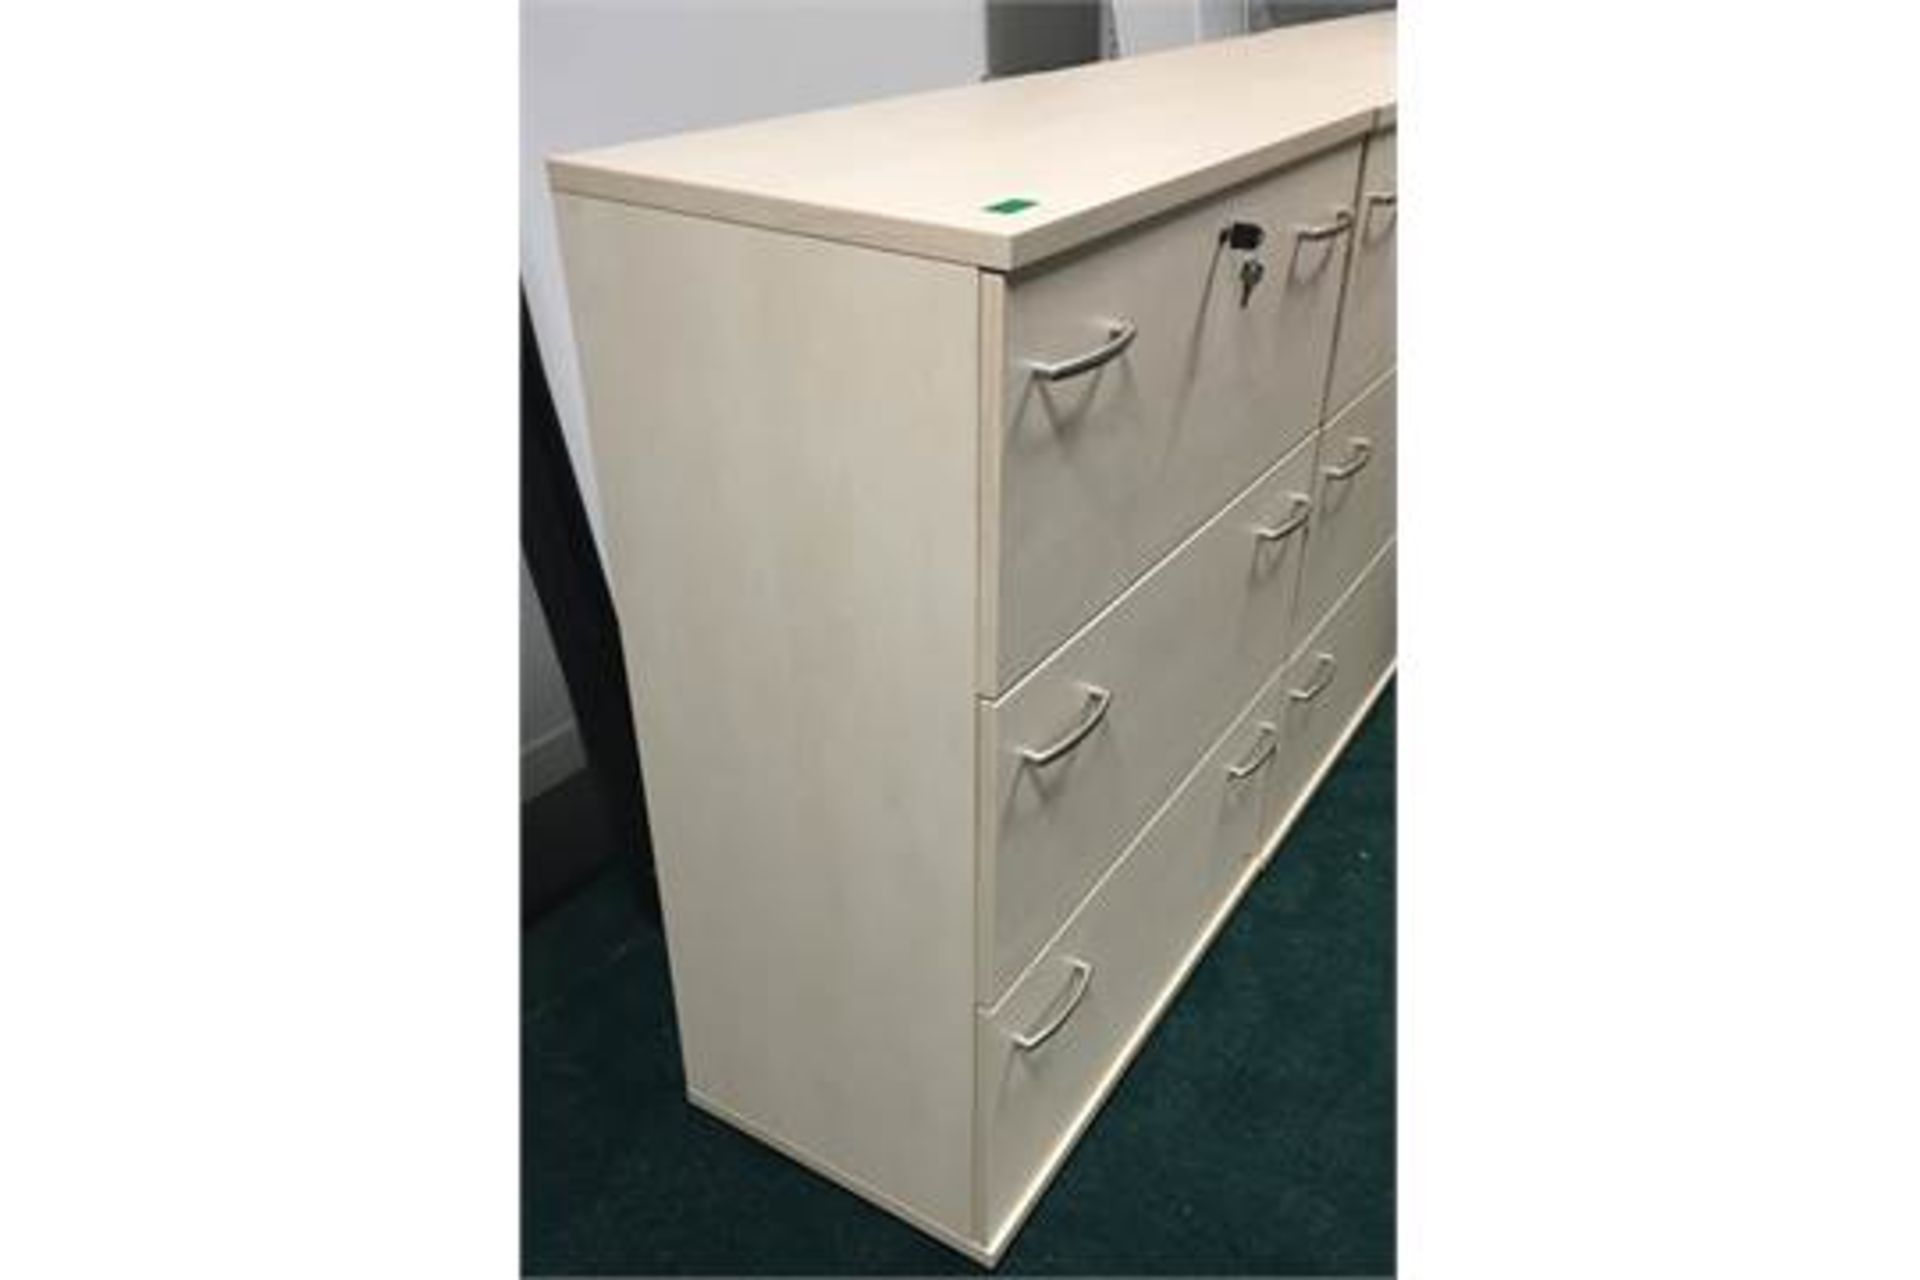 1 x Modern Three Drawer Office Filing Cabinet - Light Maple Finish - Includes Lock and Key - Premium